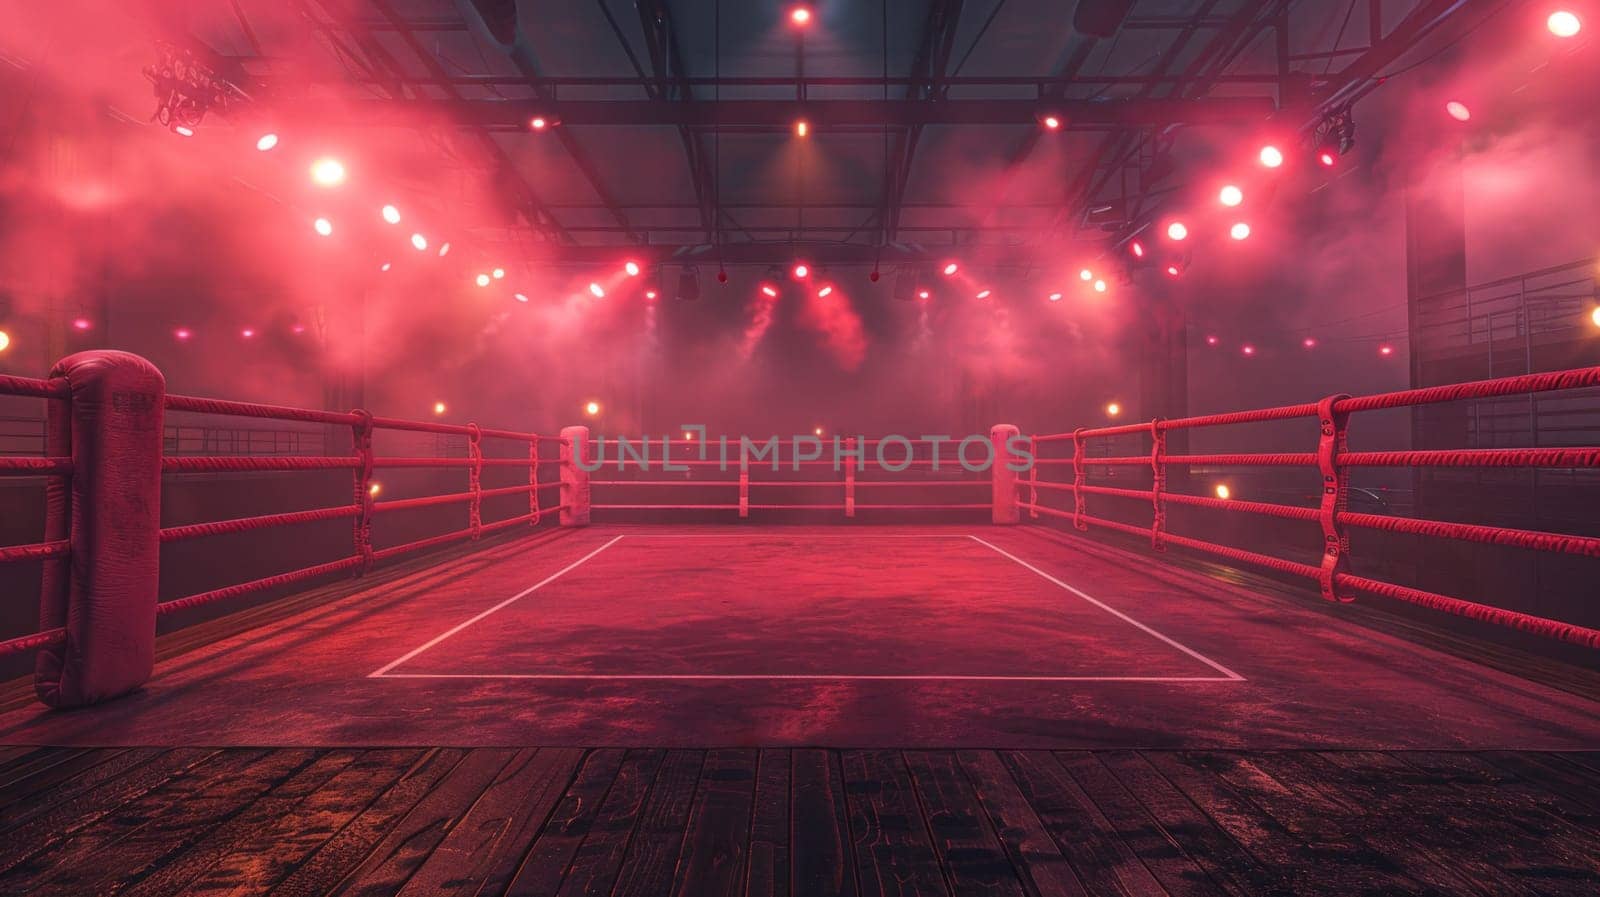 A spacious room filled with an array of red lights illuminating a pink boxing ring in the center.